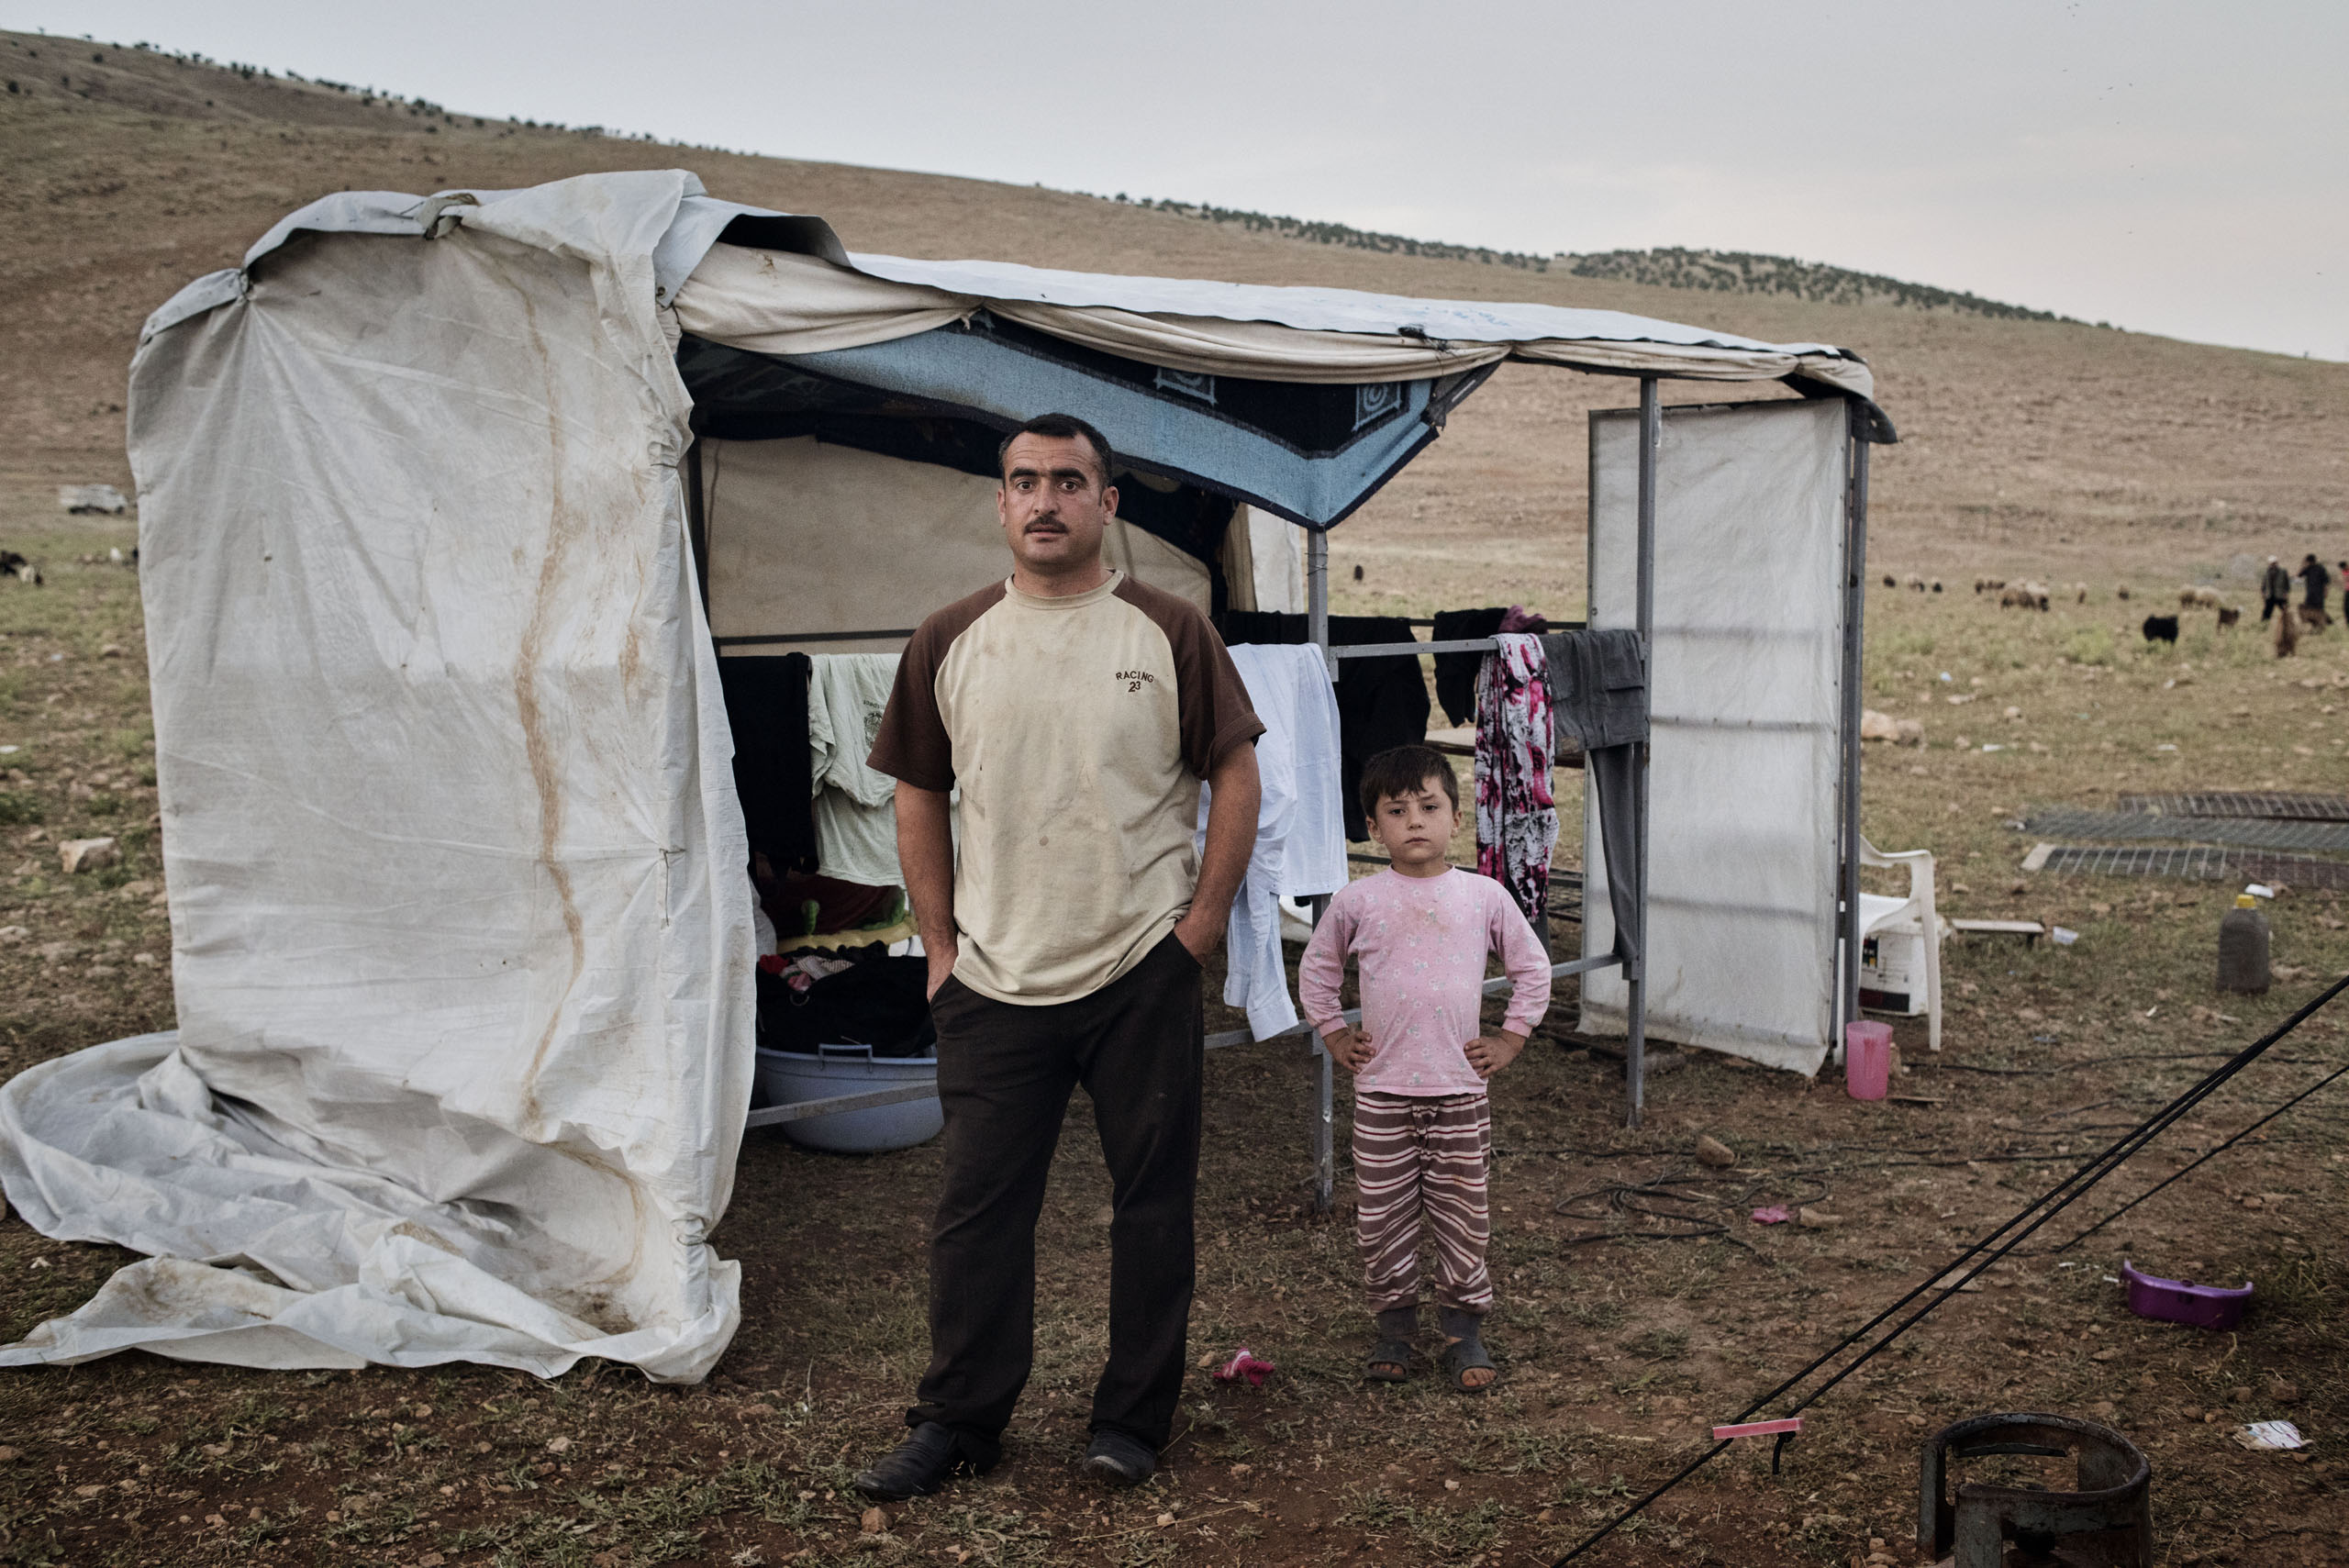 Qubad Miqdad Murad, a police officer in his thirties, stands in a camp for internally displaced people near the Iraqi town of Sinjar, May 13, 2016. Murad returned to Sinjar after Kurdish forces recaptured it from ISIS in Nov. 2015, but he since decided to move to the IDP camp in the mountains above Sinjar, fearing for the safety of his family as ISIS continues to shell the area.